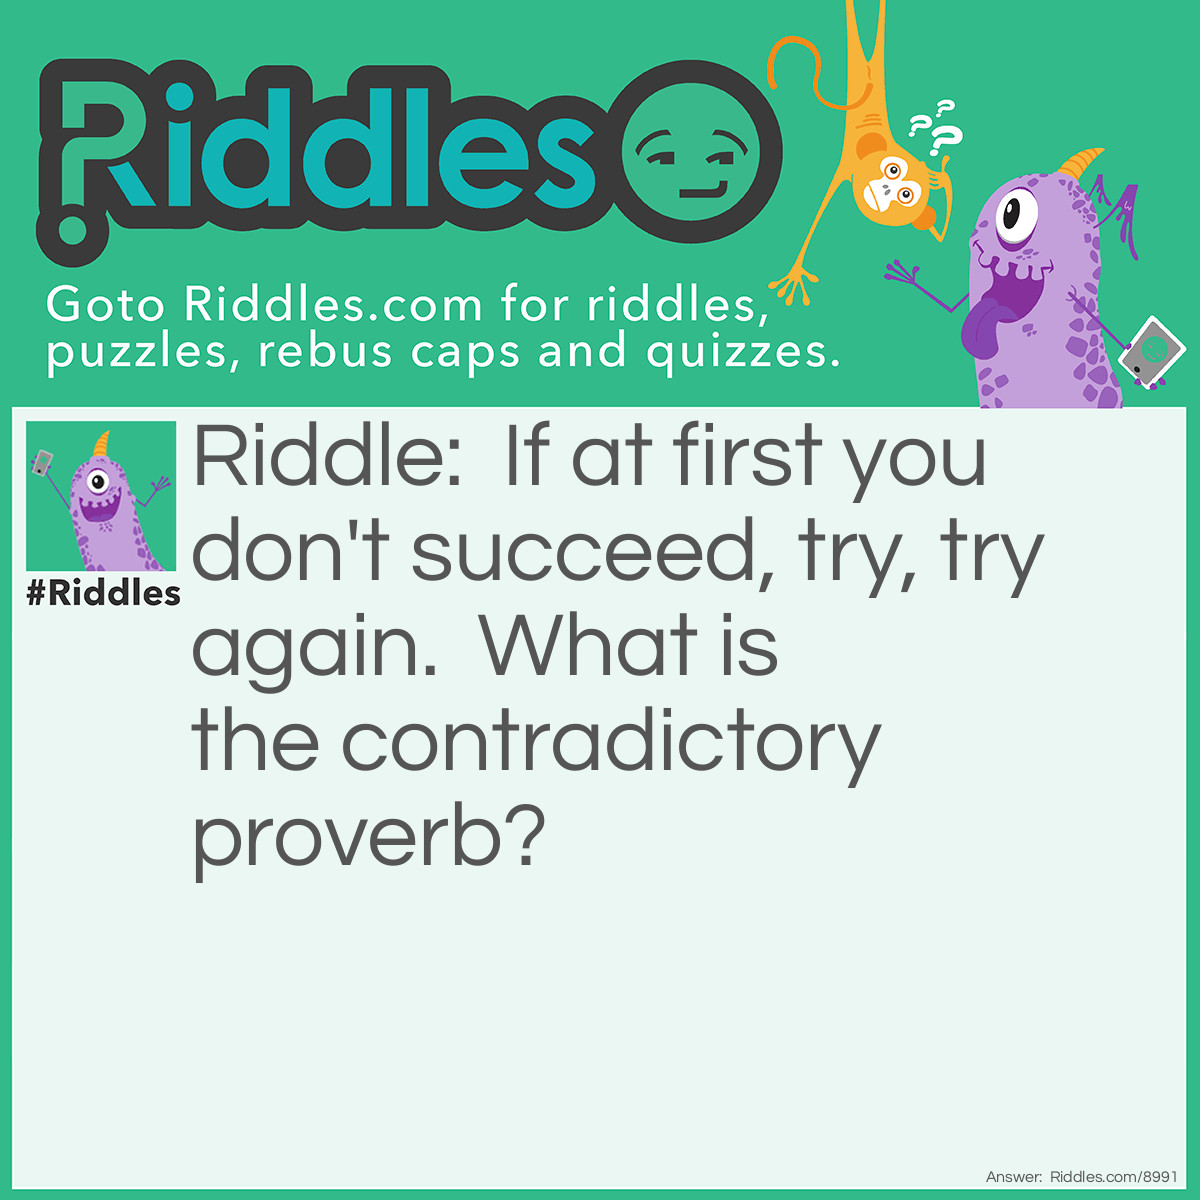 Riddle: If at first you don't succeed, try, try again.  What is the contradictory proverb? Answer: Don't beat your head against a brick wall.